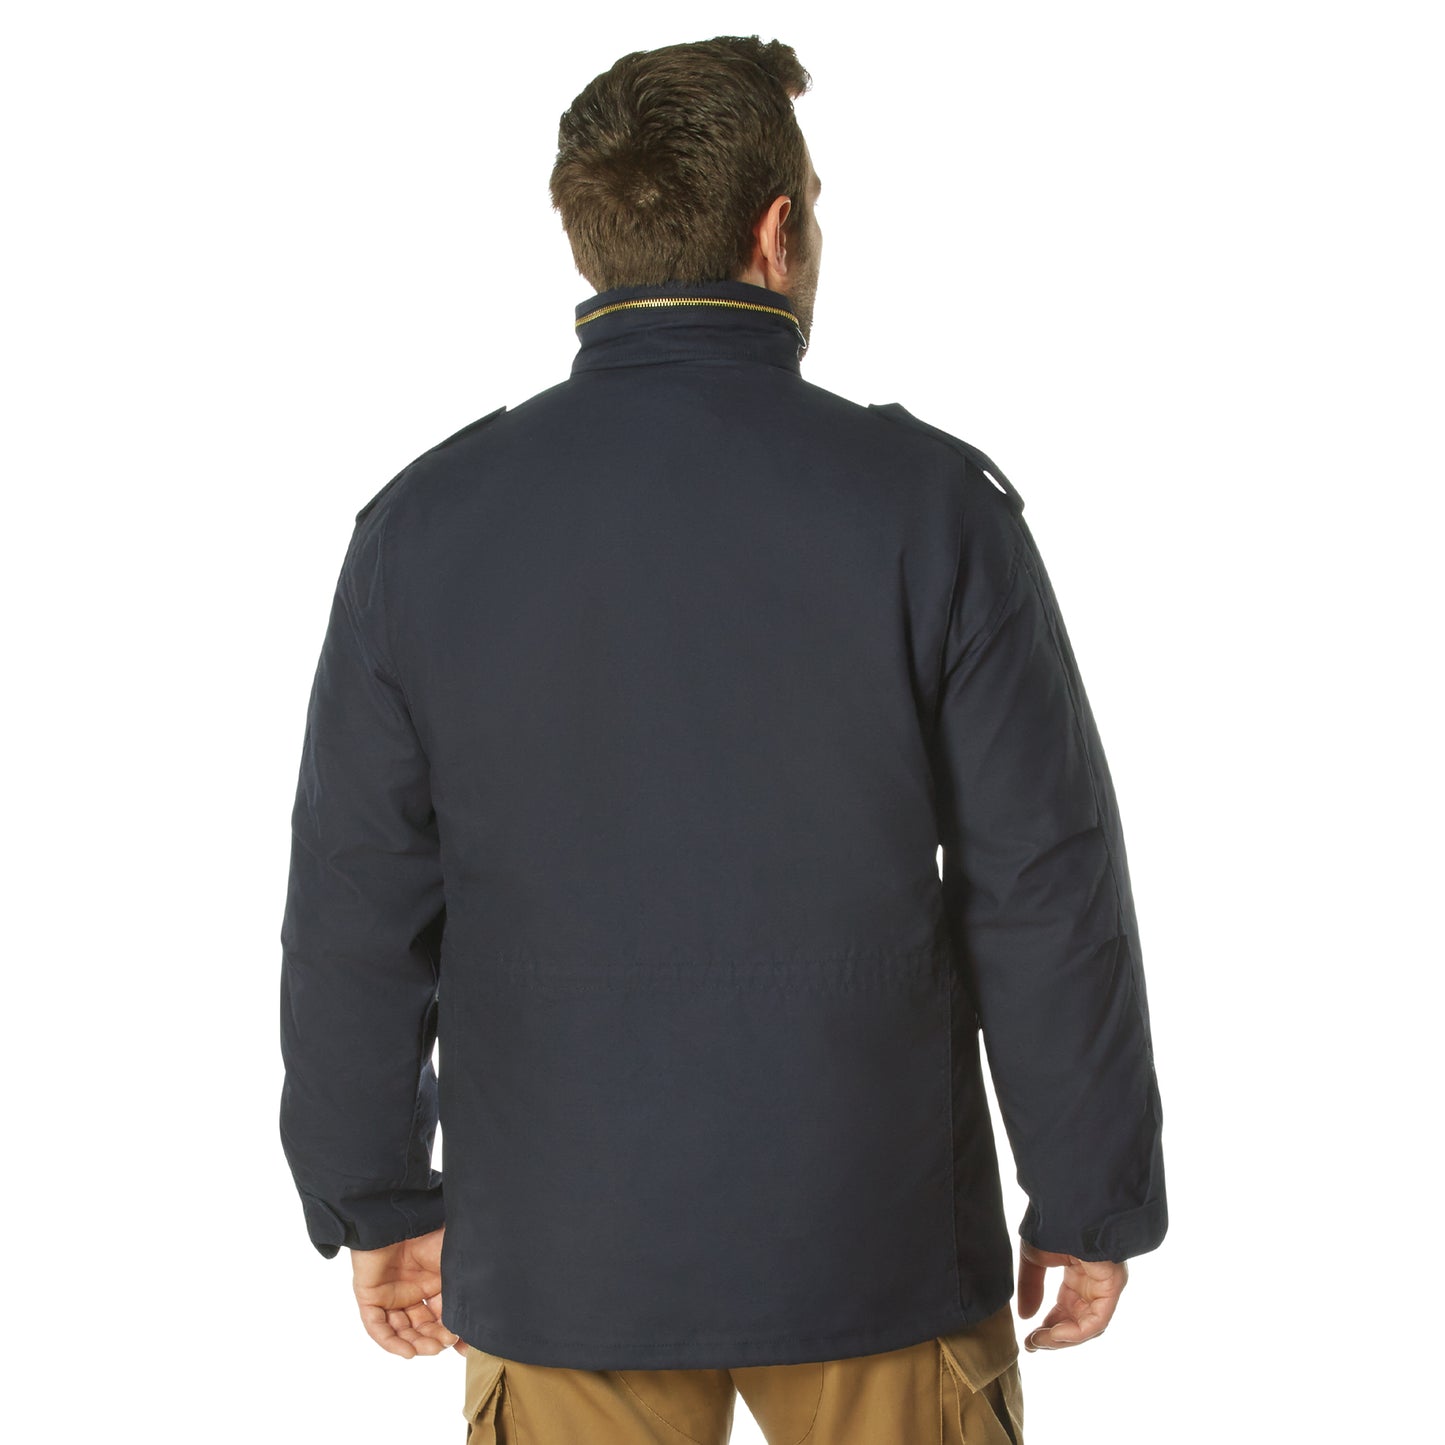 Rothco M-65 Field Jacket With Liner - Midnight Navy Blue